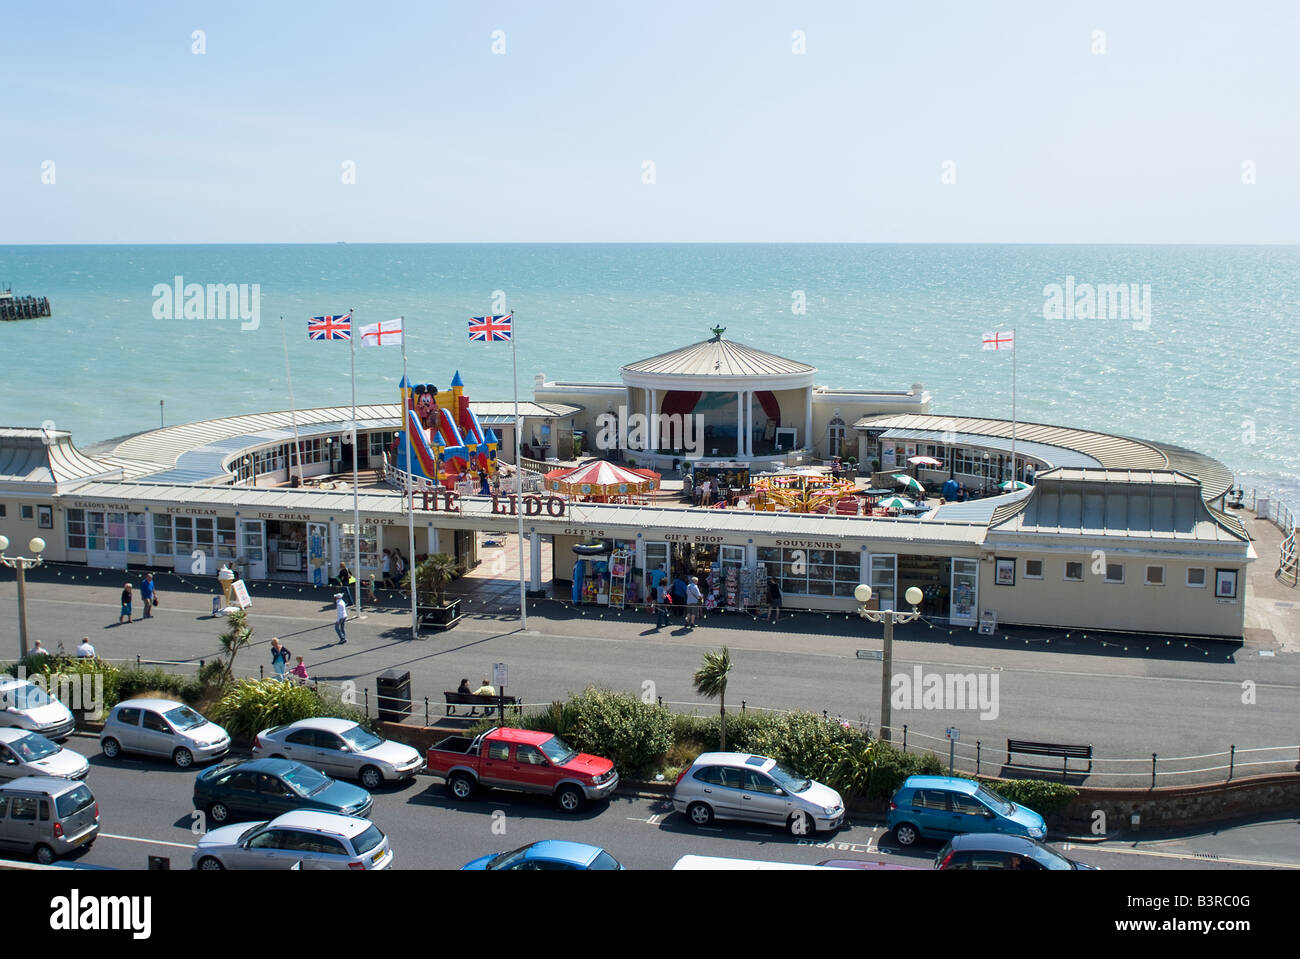 The Lido Worthing on Sea seaside resort entertainment centre in West Sussex England UK Catering food and shopping outlets on the Stock Photo